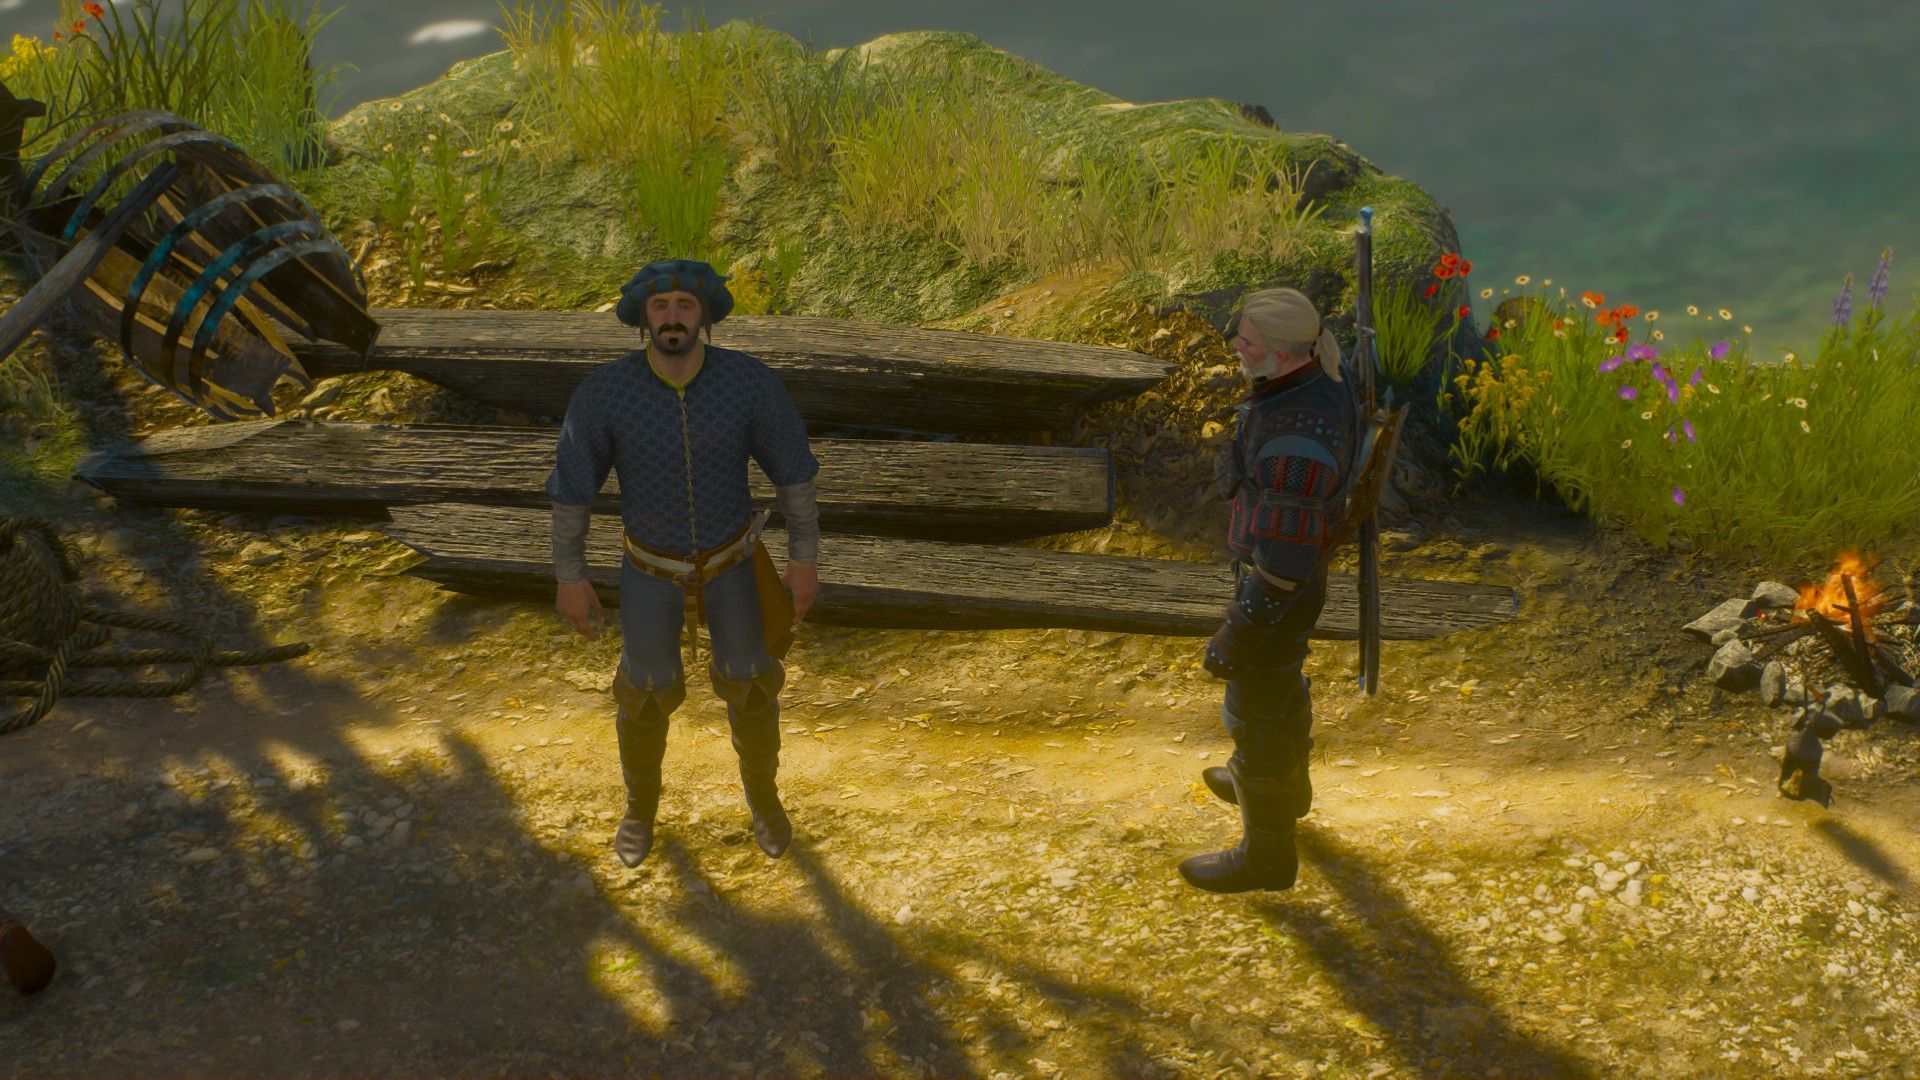 A screenshot of Geralt walking to the site supervisor in the evening.